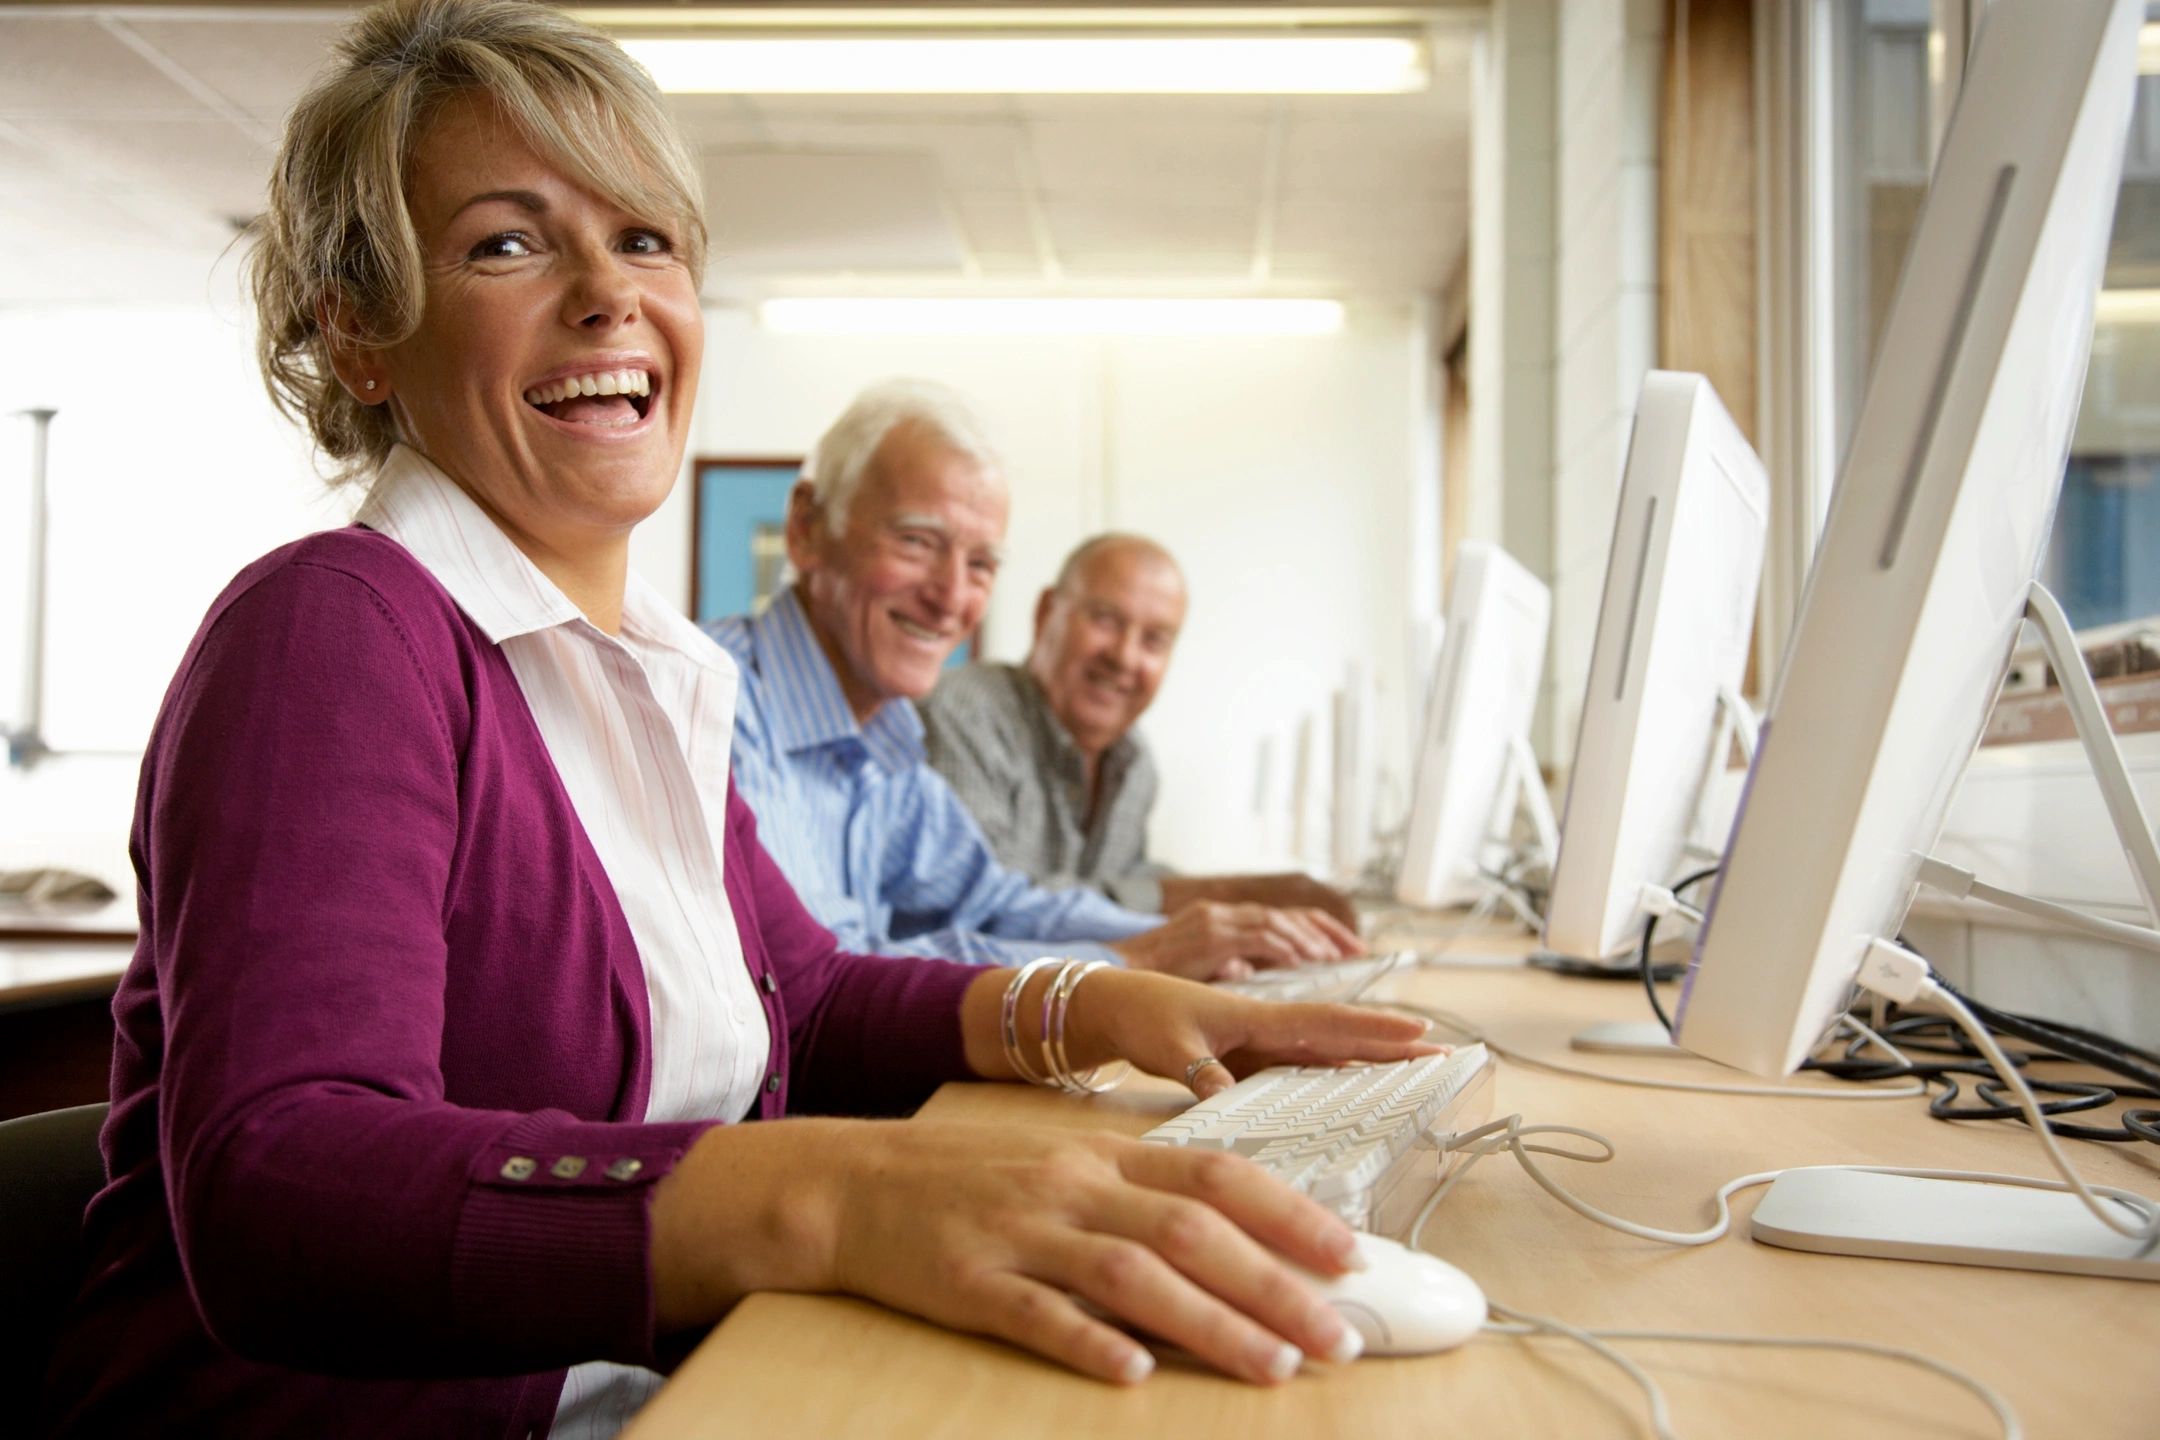 Two older men and one older woman sit at computers, smiling.